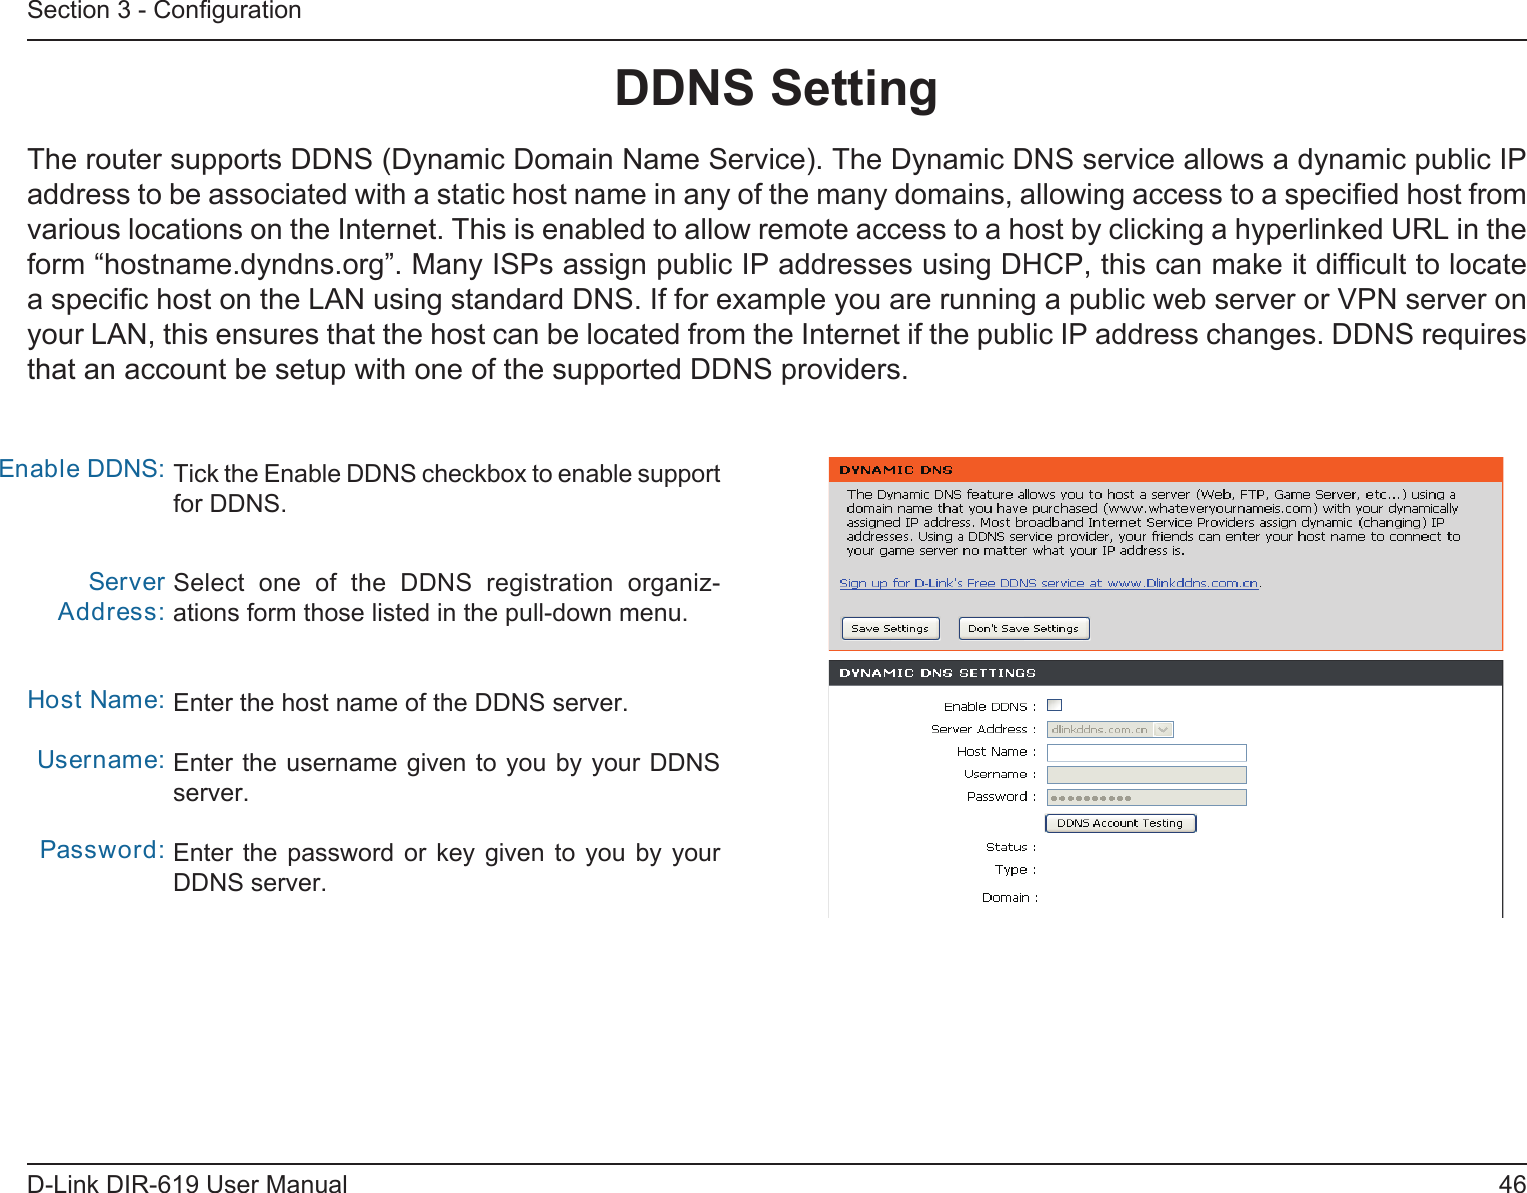 46D-Link DIR-619 User ManualSection 3 - ConﬁgurationDDNS SettingTick the Enable DDNS checkbox to enable support for DDNS.Select  one  of  the  DDNS  registration  organiz-ations form those listed in the pull-down menu. Enter the host name of the DDNS server.Enter the username given to you by your DDNSserver.Enter the password or key given to  you  by  yourDDNS server.Enable DDNS:Server Address:Host Name:Username:Password:The router supports DDNS (Dynamic Domain Name Service). The Dynamic DNS service allows a dynamic public IPaddress to be associated with a static host name in any of the many domains, allowing access to a speciﬁed host from various locations on the Internet. This is enabled to allow remote access to a host by clicking a hyperlinked URL in theform “hostname.dyndns.org”. Many ISPs assign public IP addresses using DHCP, this can make it difﬁcult to locate a speciﬁc host on the LAN using standard DNS. If for example you are running a public web server or VPN server on your LAN, this ensures that the host can be located from the Internet if the public IP address changes. DDNS requires that an account be setup with one of the supported DDNS providers.